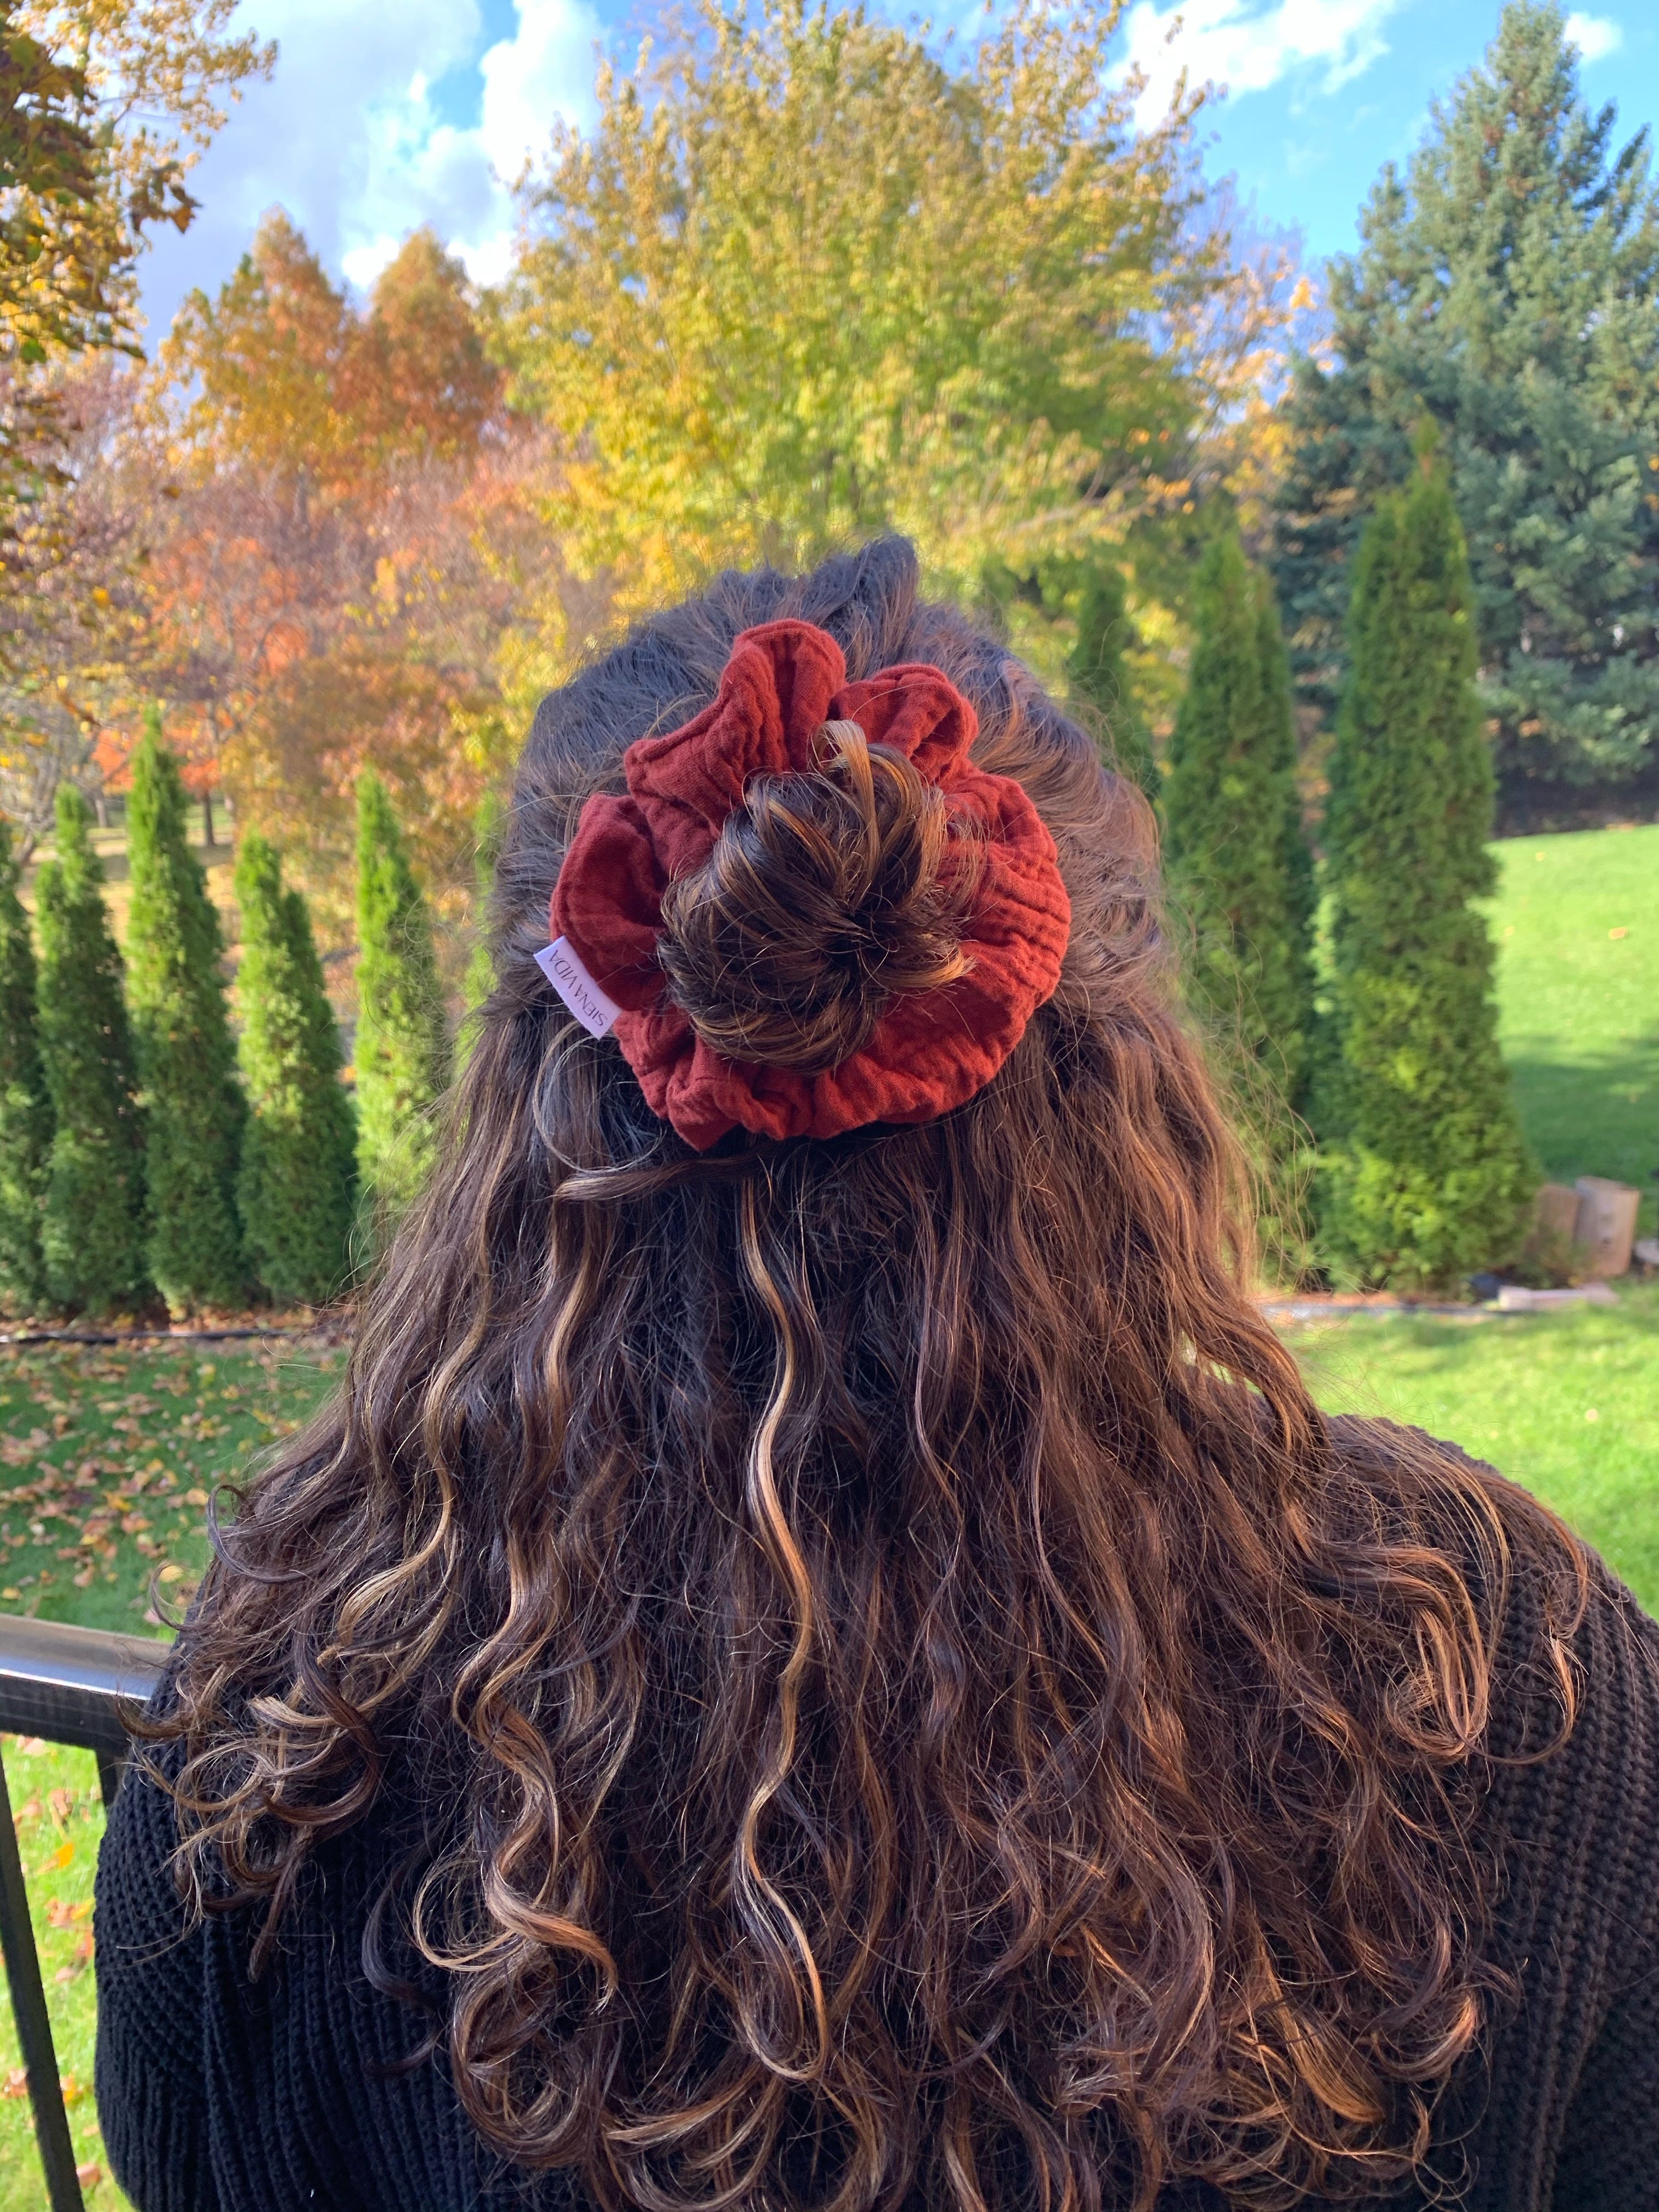 Bright Red Organic Cotton Scrunchie in woman's hair